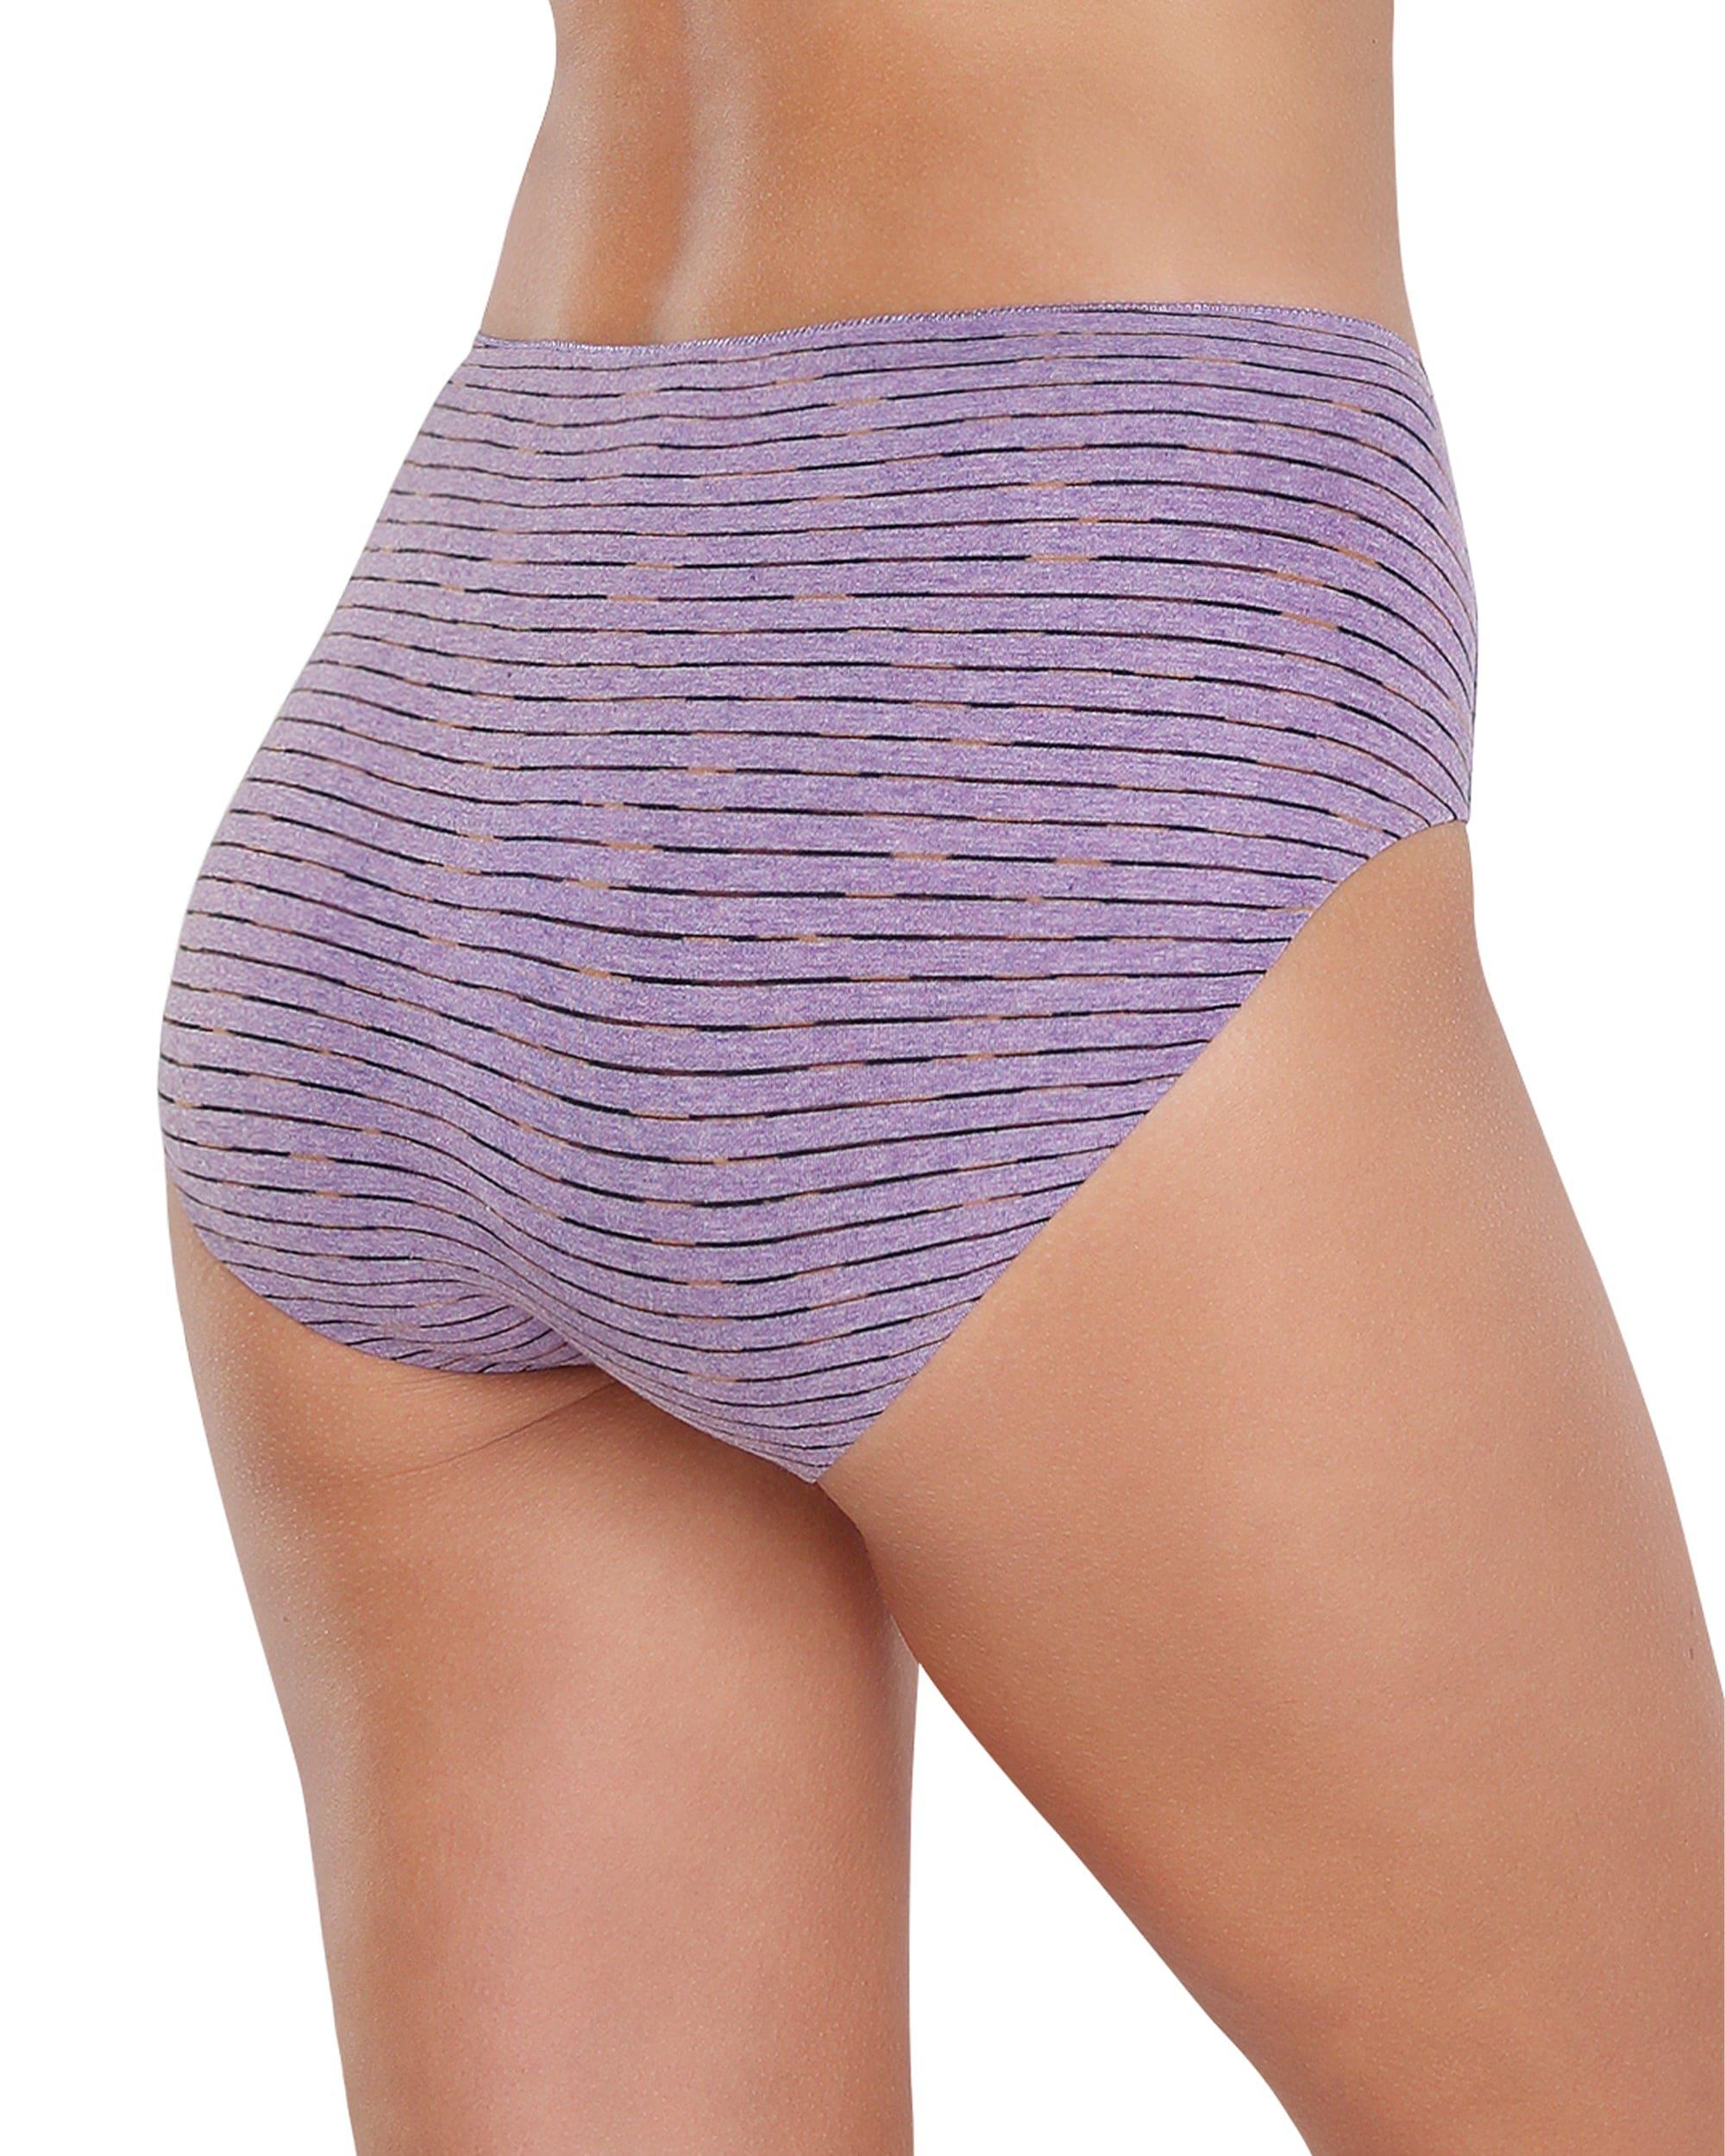 Women's Seamless Low-Rise Briefs, 6 Pack